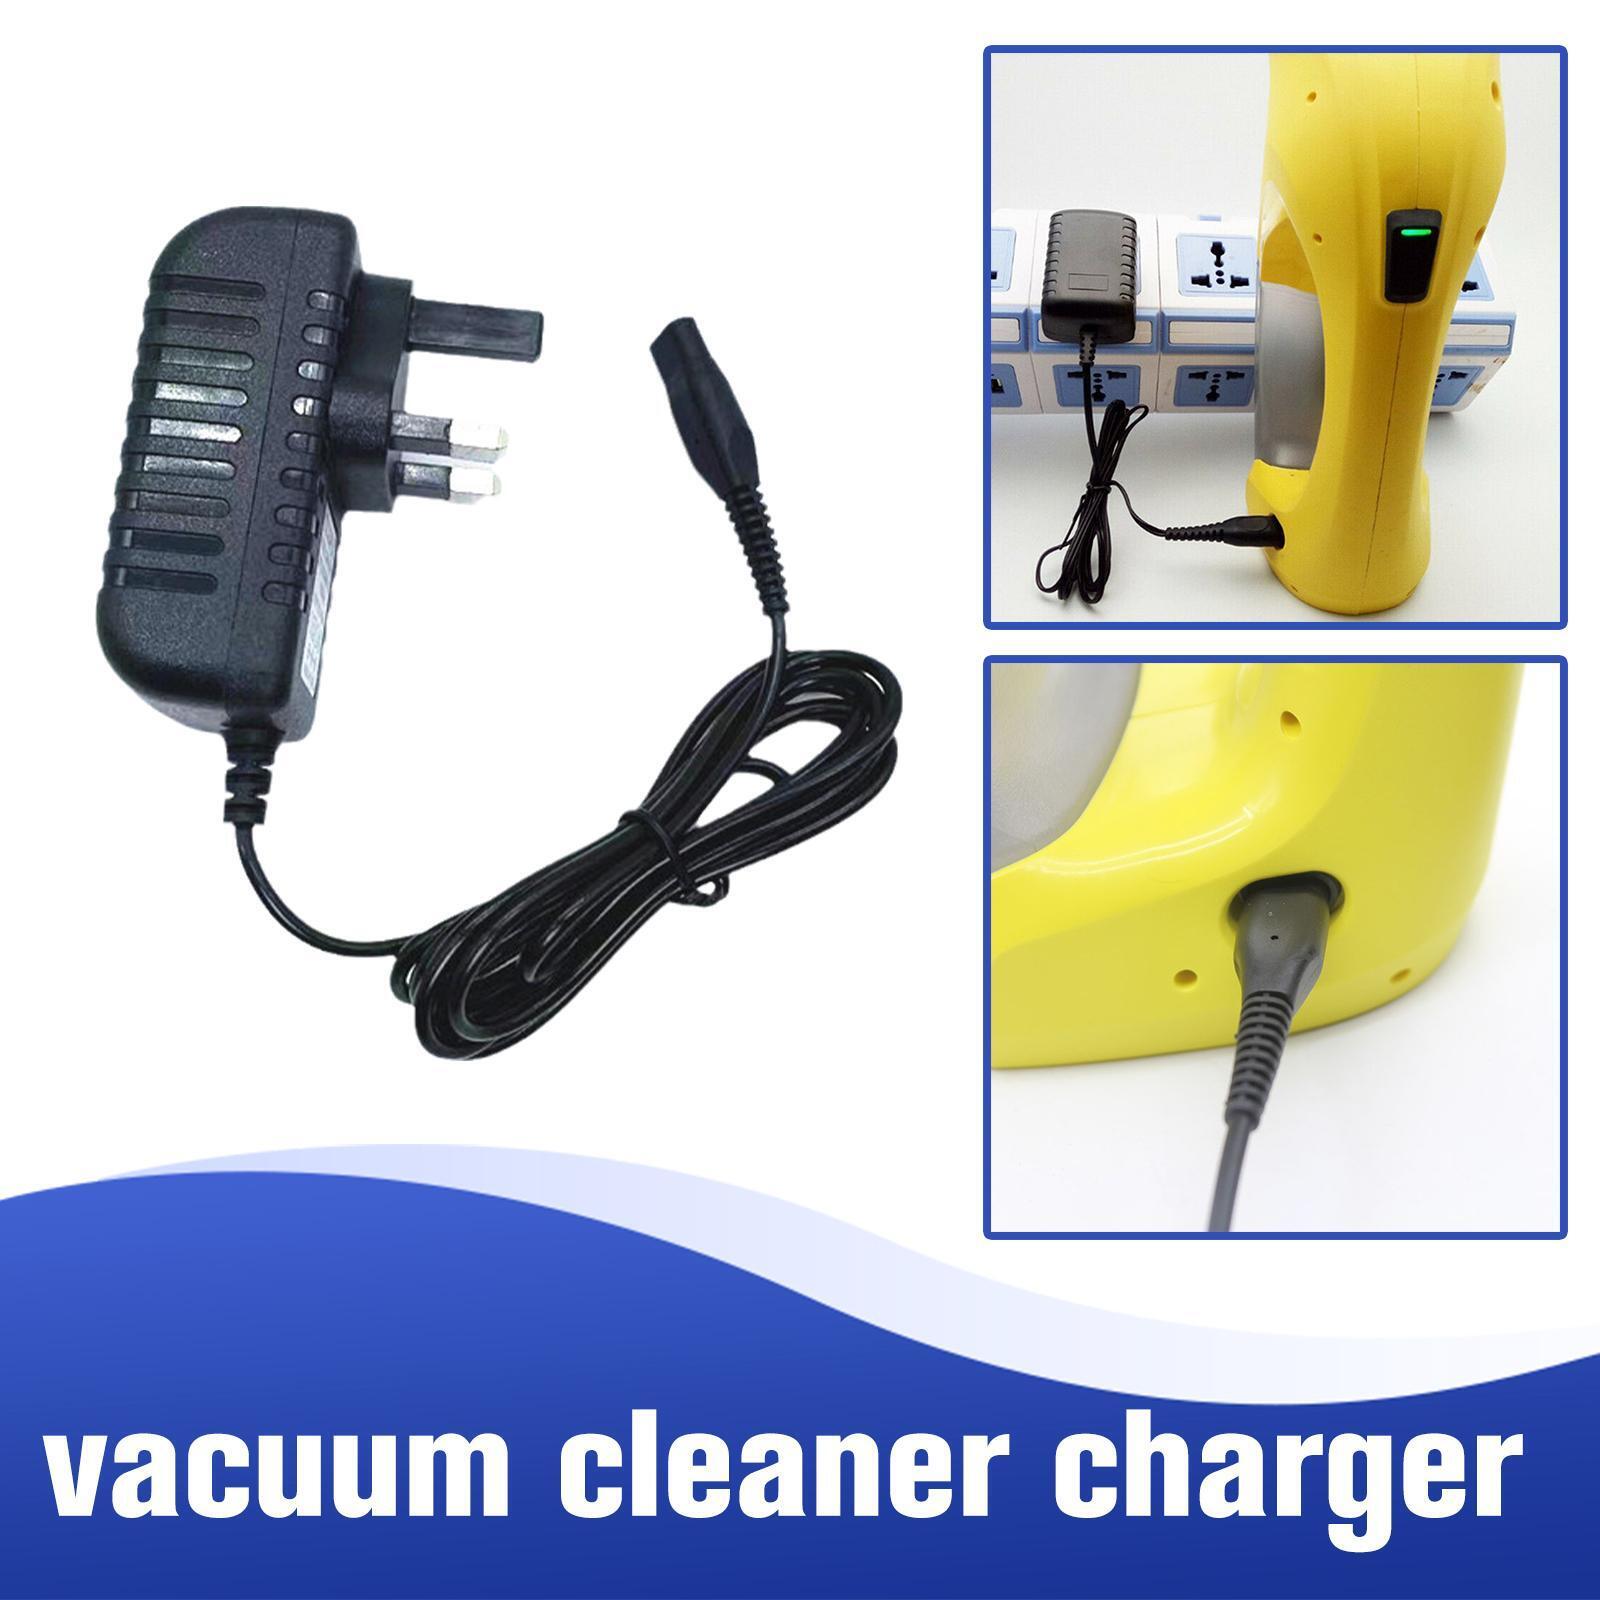 UK Plug Window Vac Vacuum Battery Charger Karcher WV2 50 Power 70 75 60 C1Z6 UK Plug Window Vac Vacuum Battery Charger - Click Image to Close